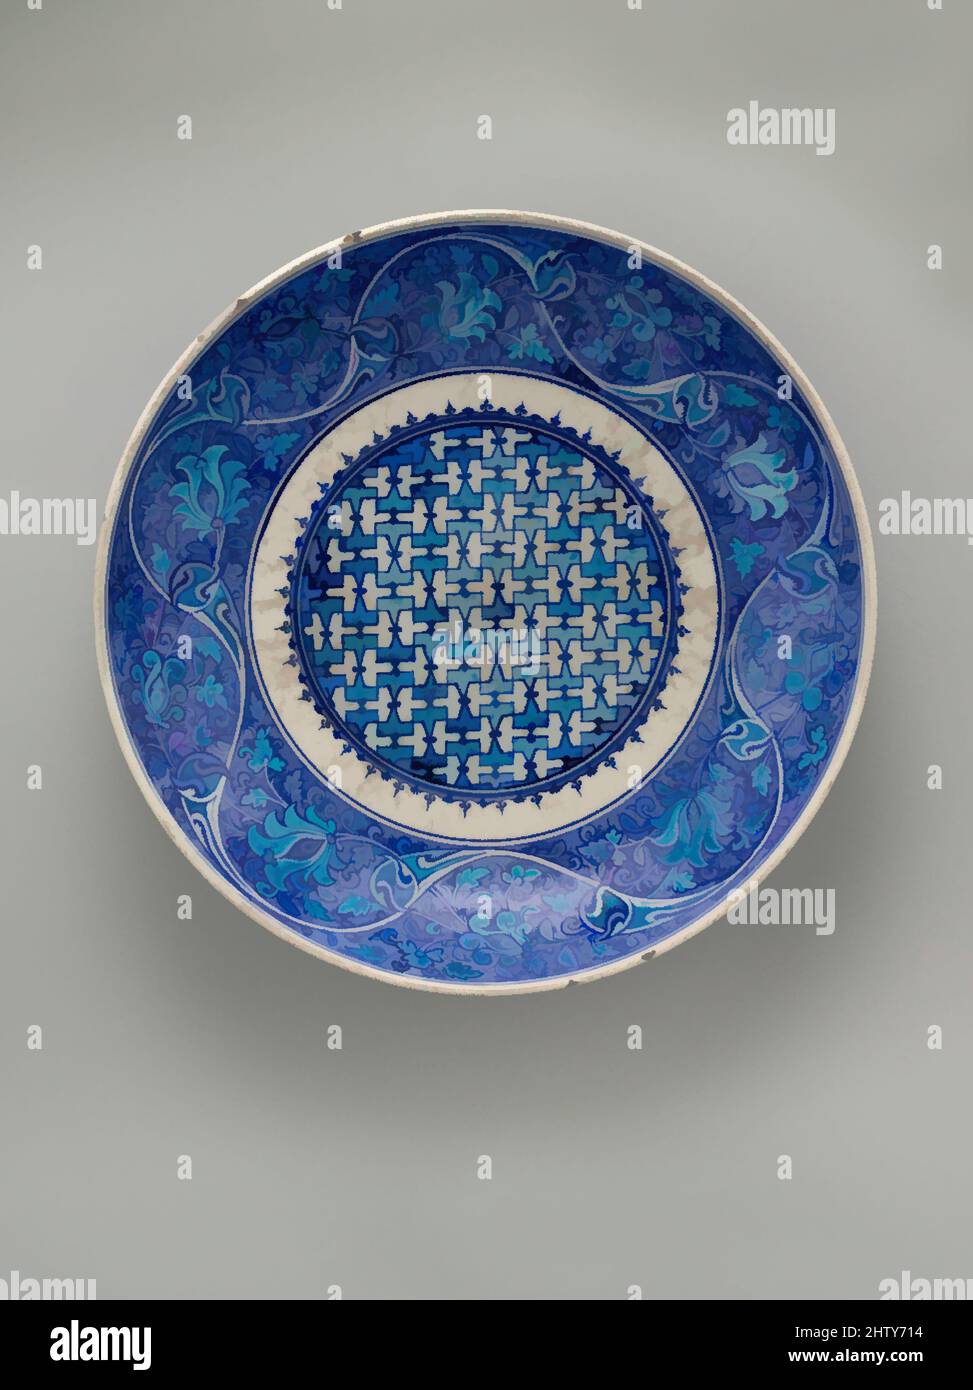 Art inspired by Dish, mid-16th century, Made in Turkey, Iznik, Stonepaste; painted in turquoise and two hues of blue under transparent glaze, H. 3 in. (7.62 cm), Ceramics, Classic works modernized by Artotop with a splash of modernity. Shapes, color and value, eye-catching visual impact on art. Emotions through freedom of artworks in a contemporary way. A timeless message pursuing a wildly creative new direction. Artists turning to the digital medium and creating the Artotop NFT Stock Photo